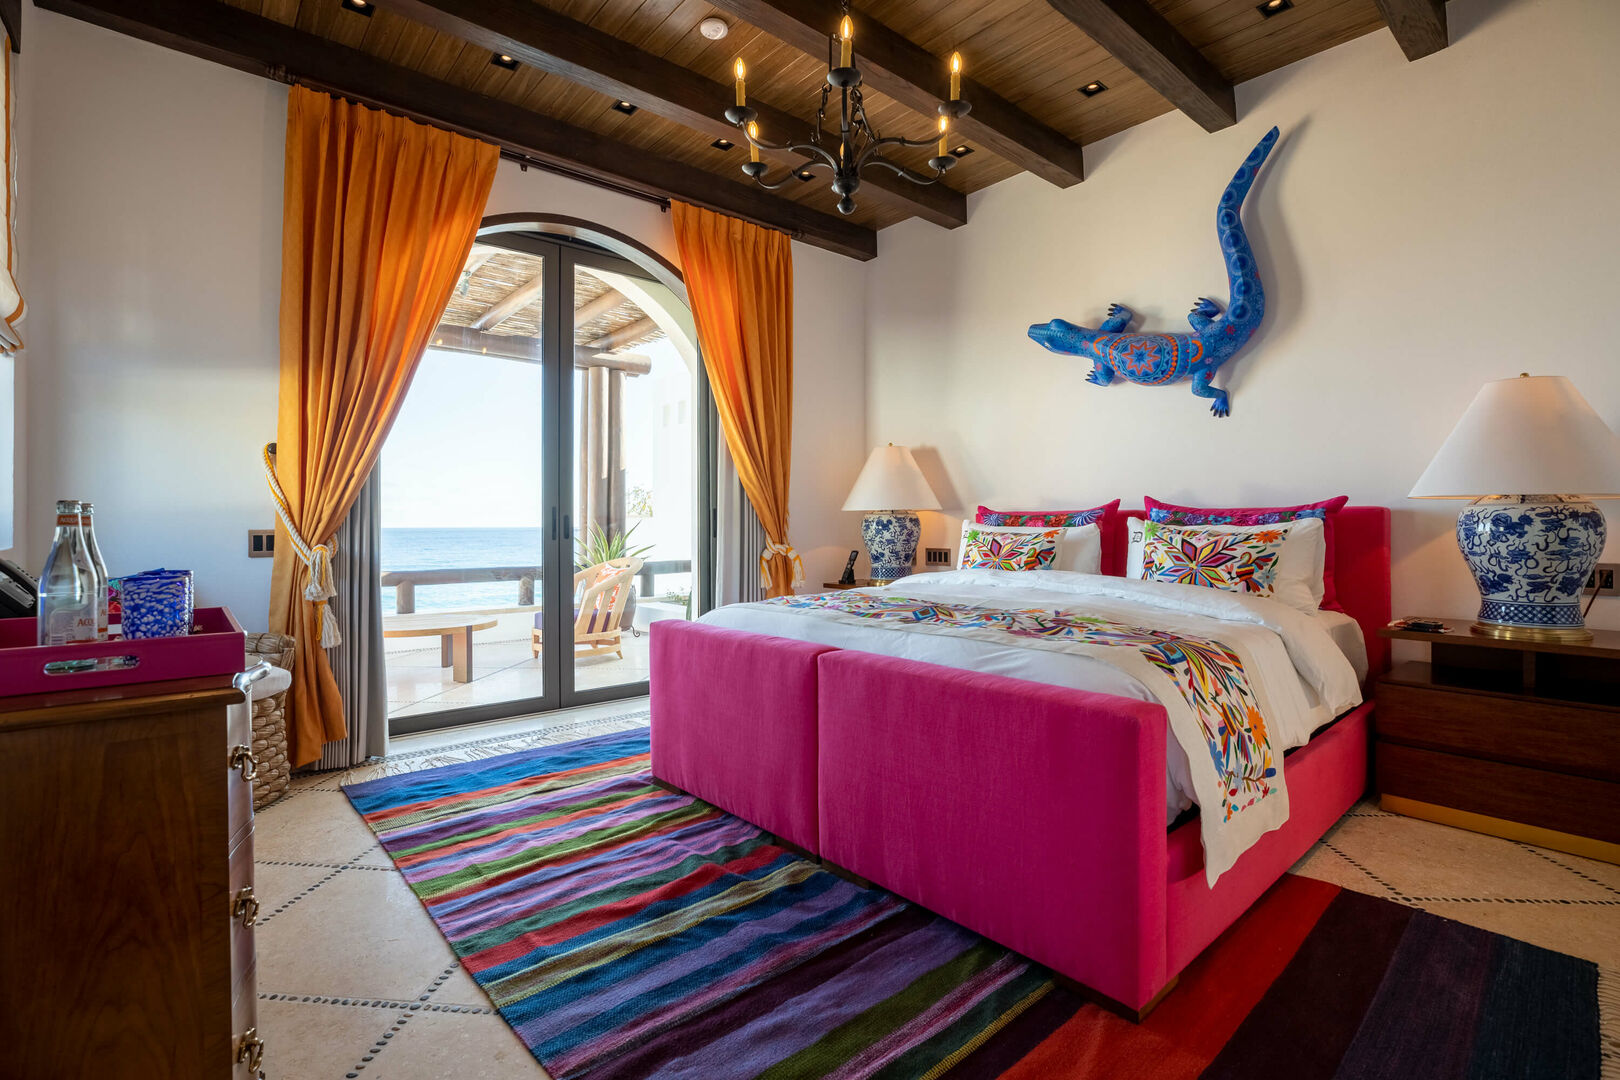 A large lizard decoration hangs above a red bed in one of the bedrooms of La Datcha.